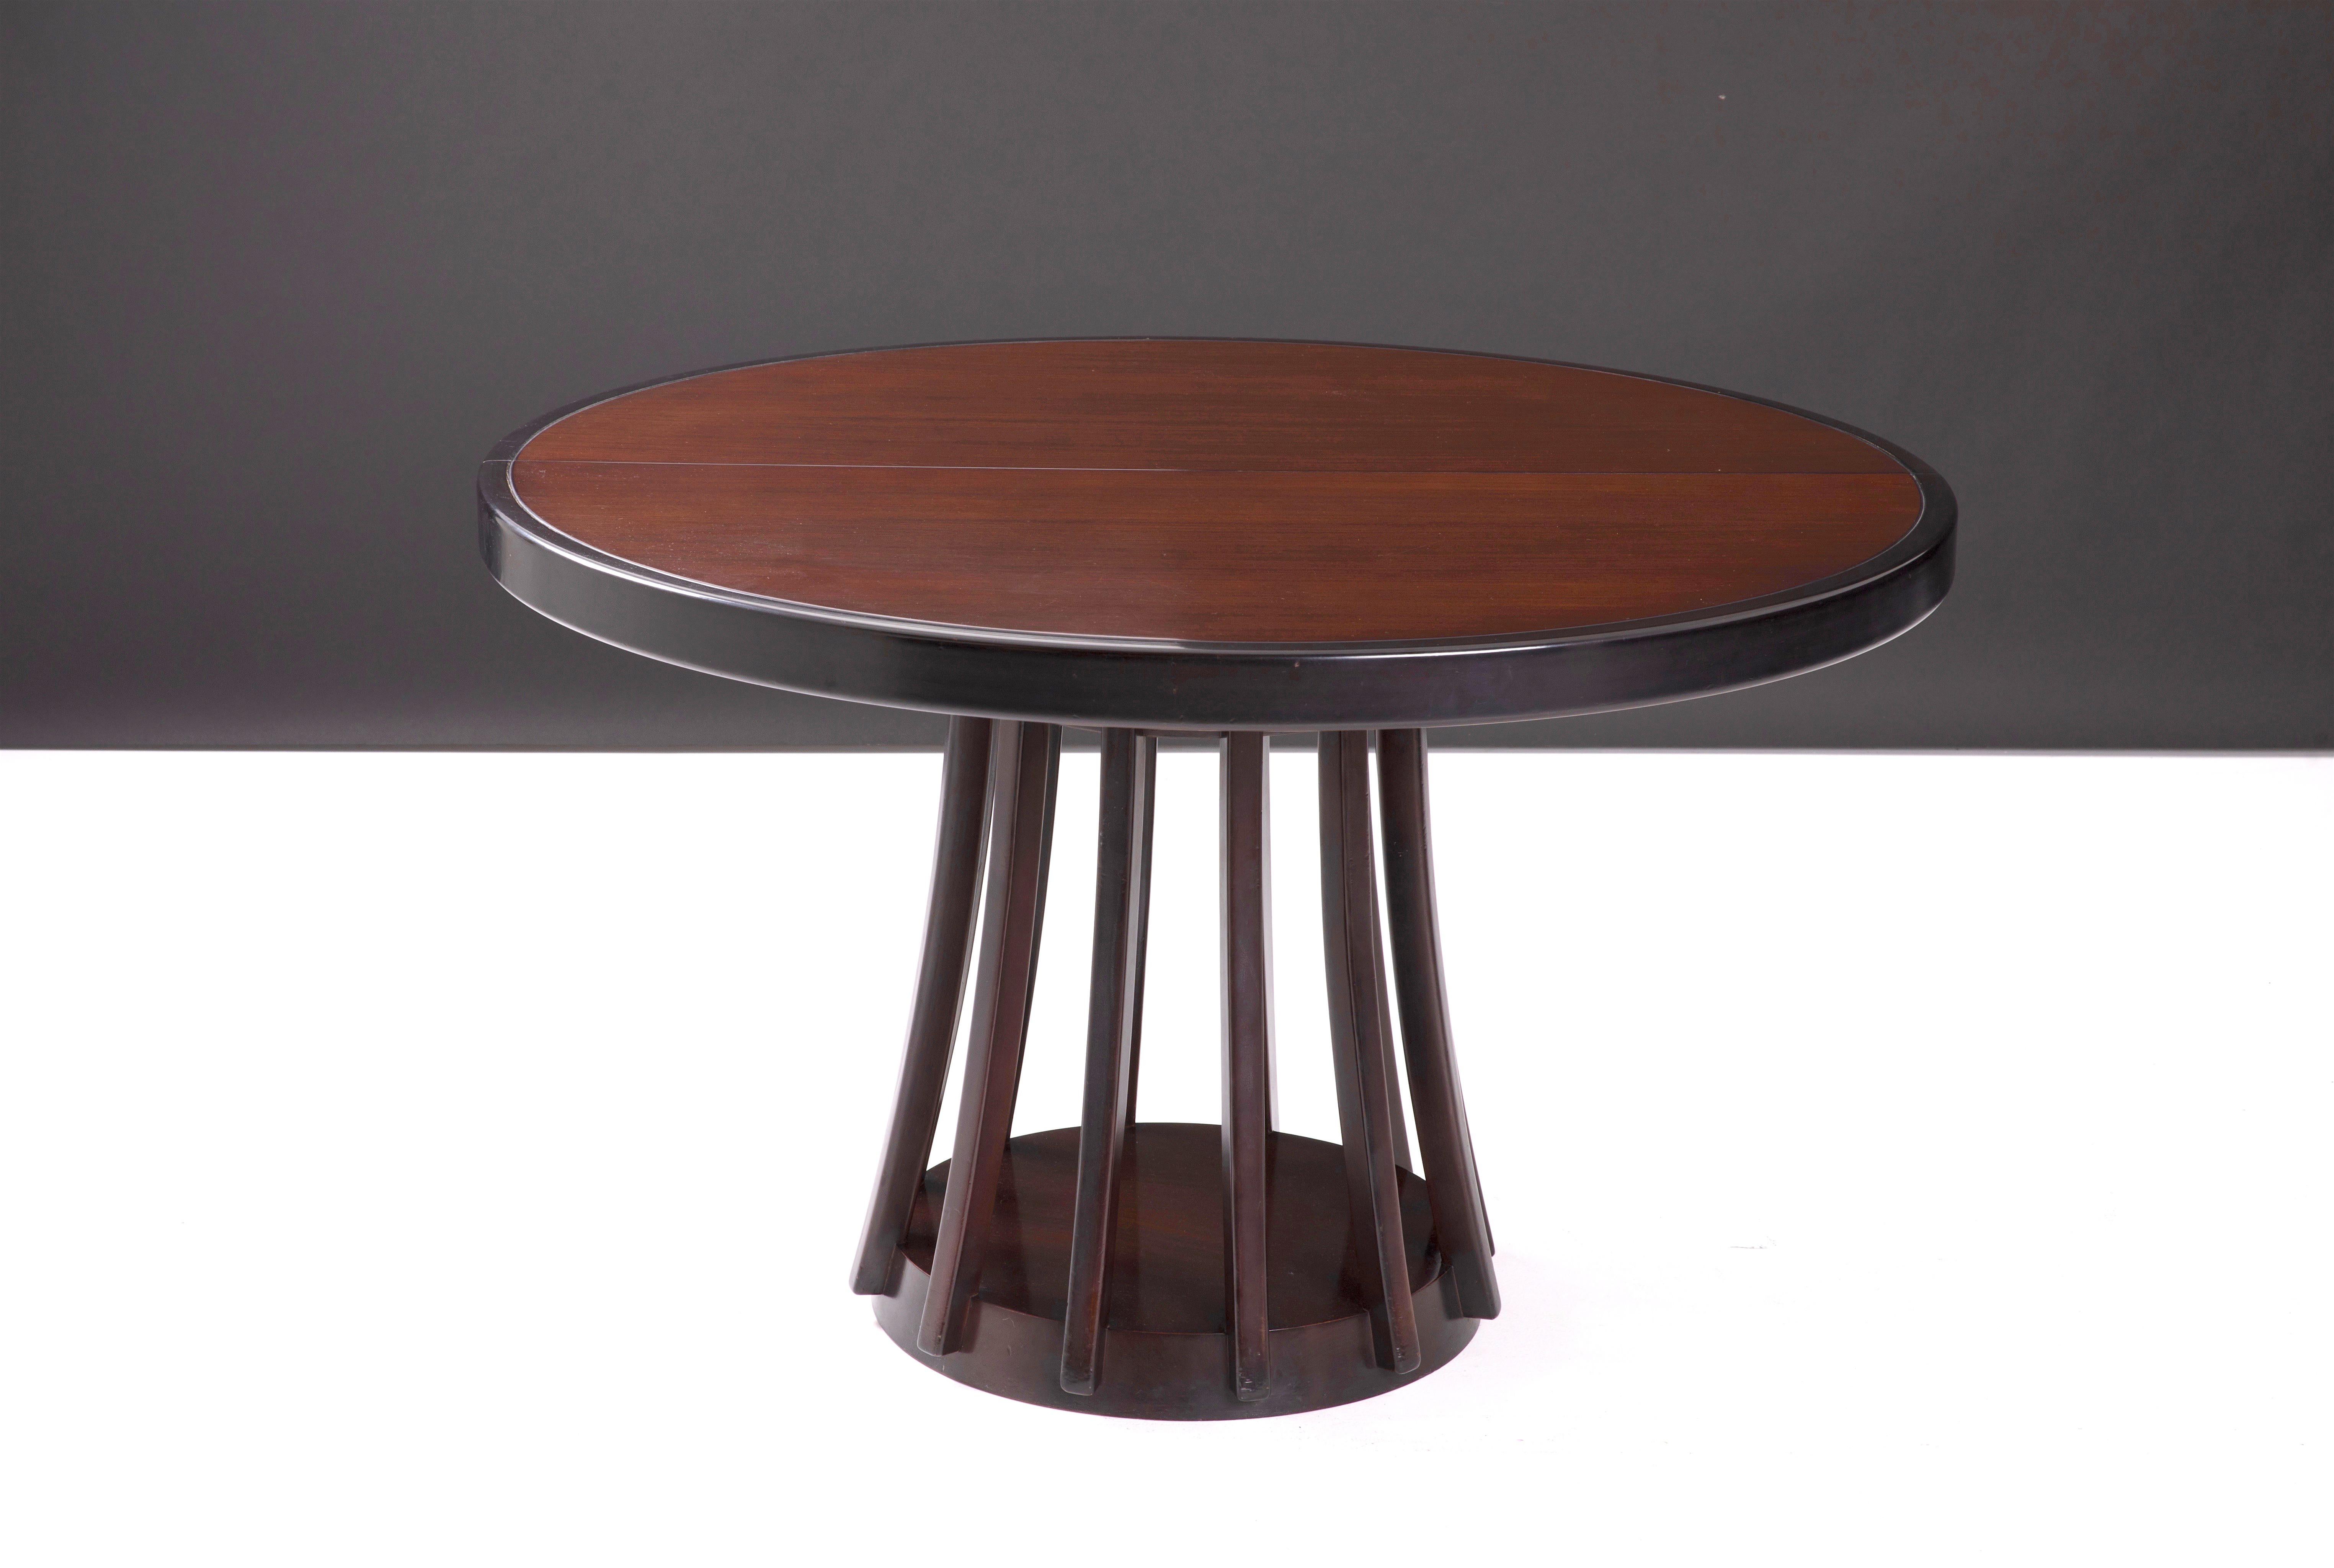 Mid-Century Modern Italian extendable dark mahogany wood dining table by Angelo Mangiarotti manufactured by La Sorgente Dei Mobili, 1972.
The table has an extension of cm.40 (about 16 inch.)
Literature: 